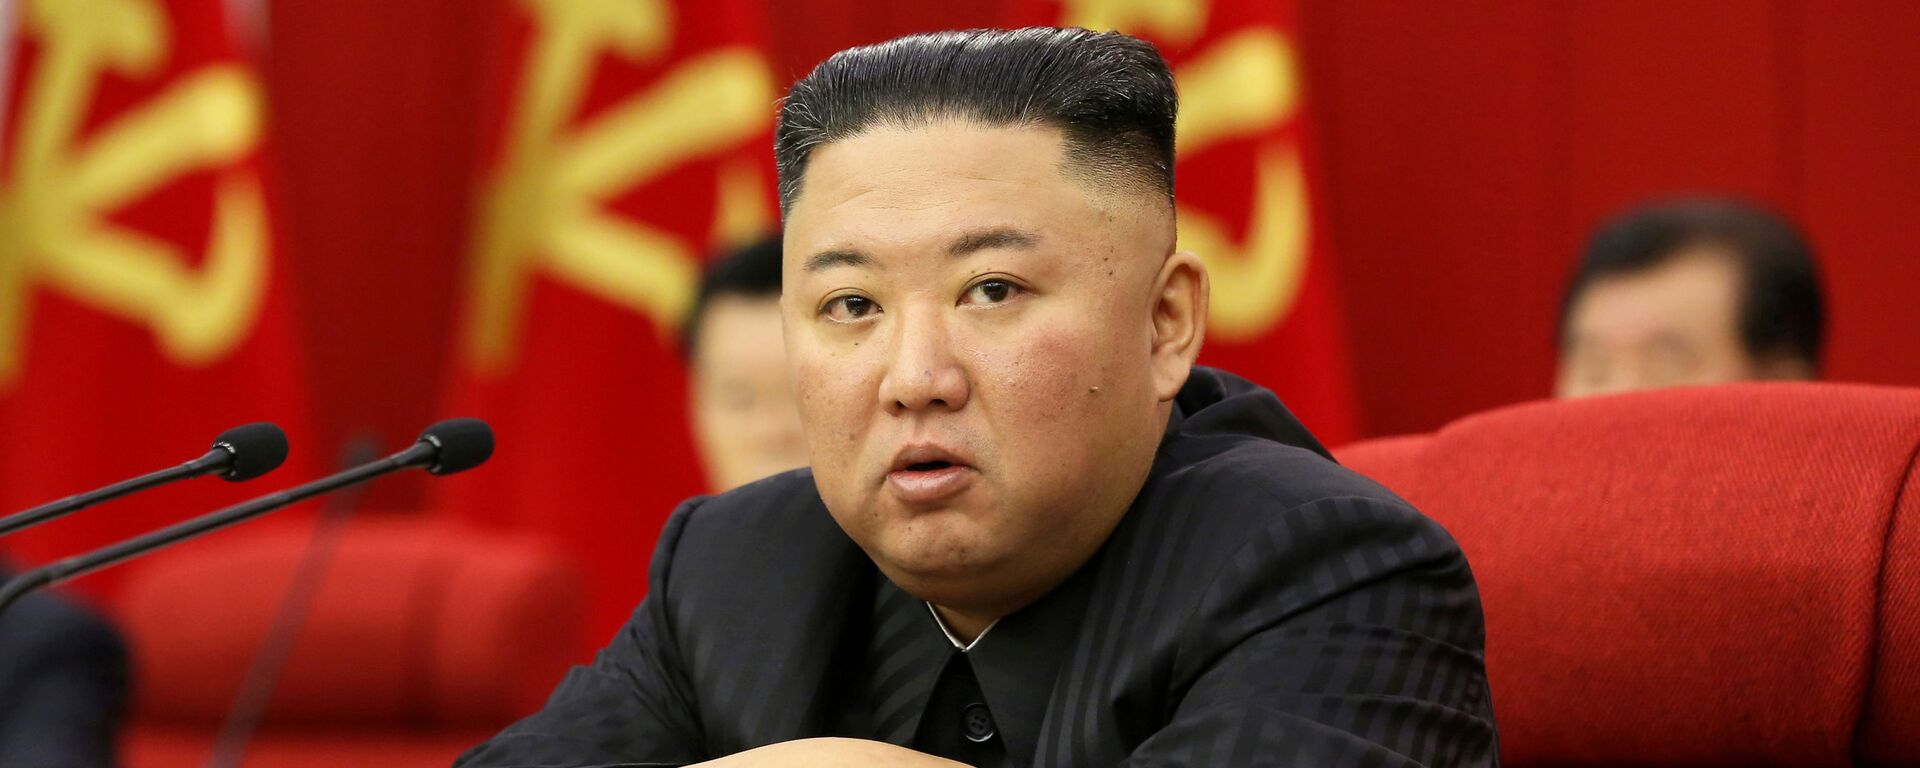 North Korean leader Kim Jong Un speaks at a meeting of the Workers' Party of Korea in Pyongyang, North Korea in this image released 18 June 2021 by the country's Korean Central News Agency. - Sputnik International, 1920, 02.08.2021